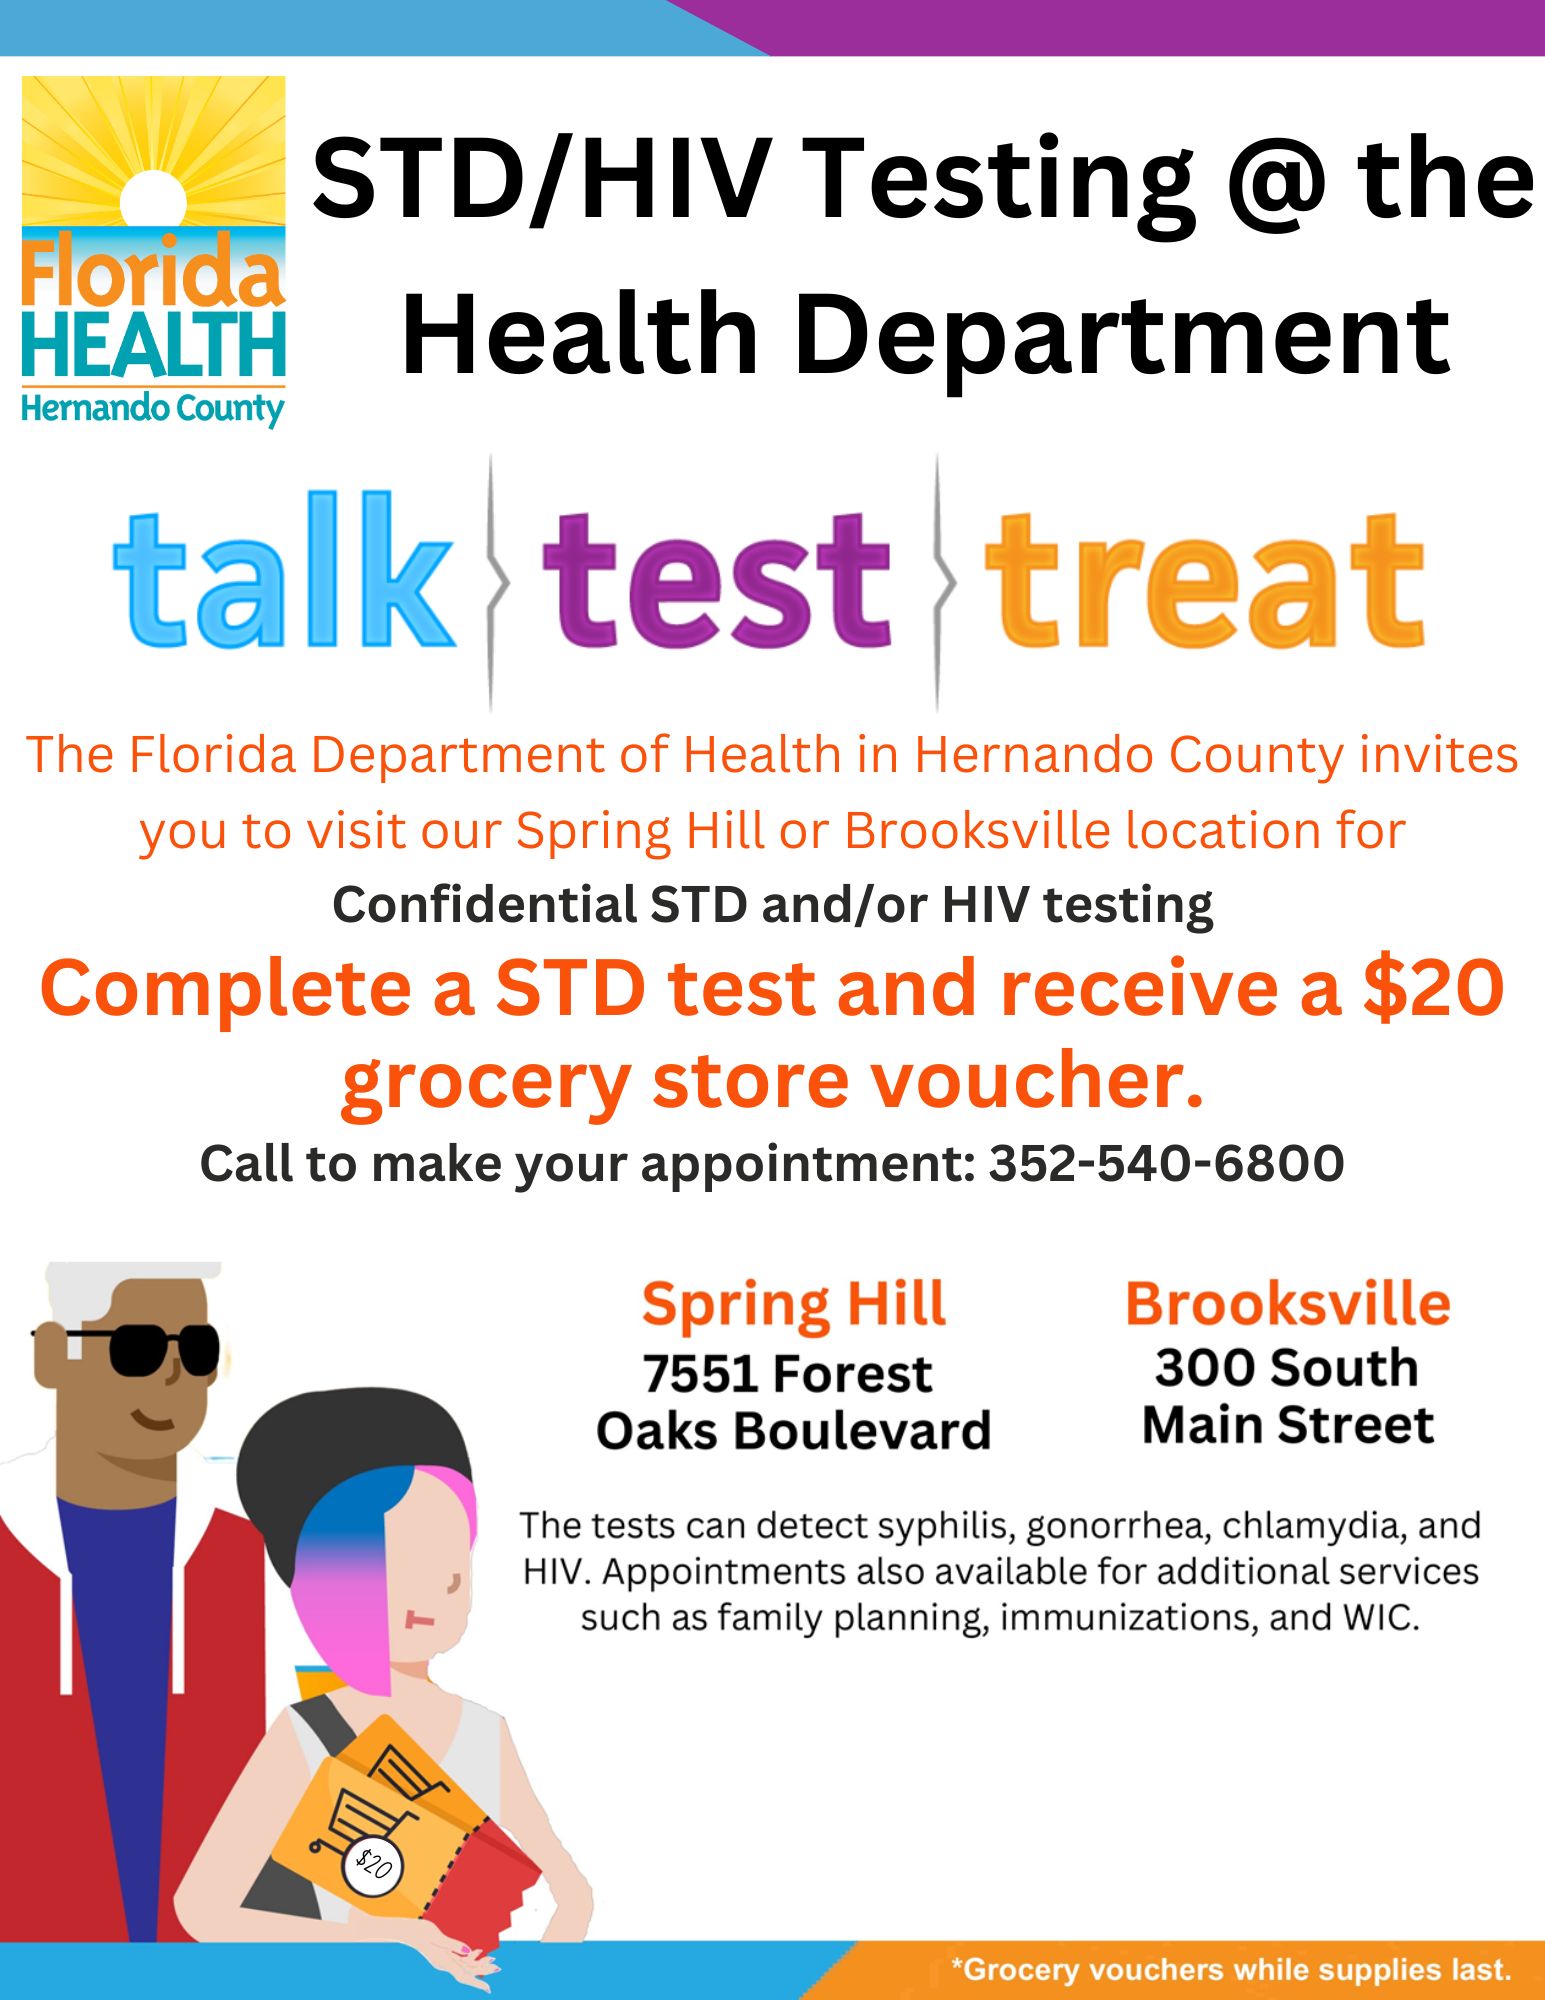 HIV/STD testing in Hernando County, Spring Hill and Brooksville. $20 voucher.